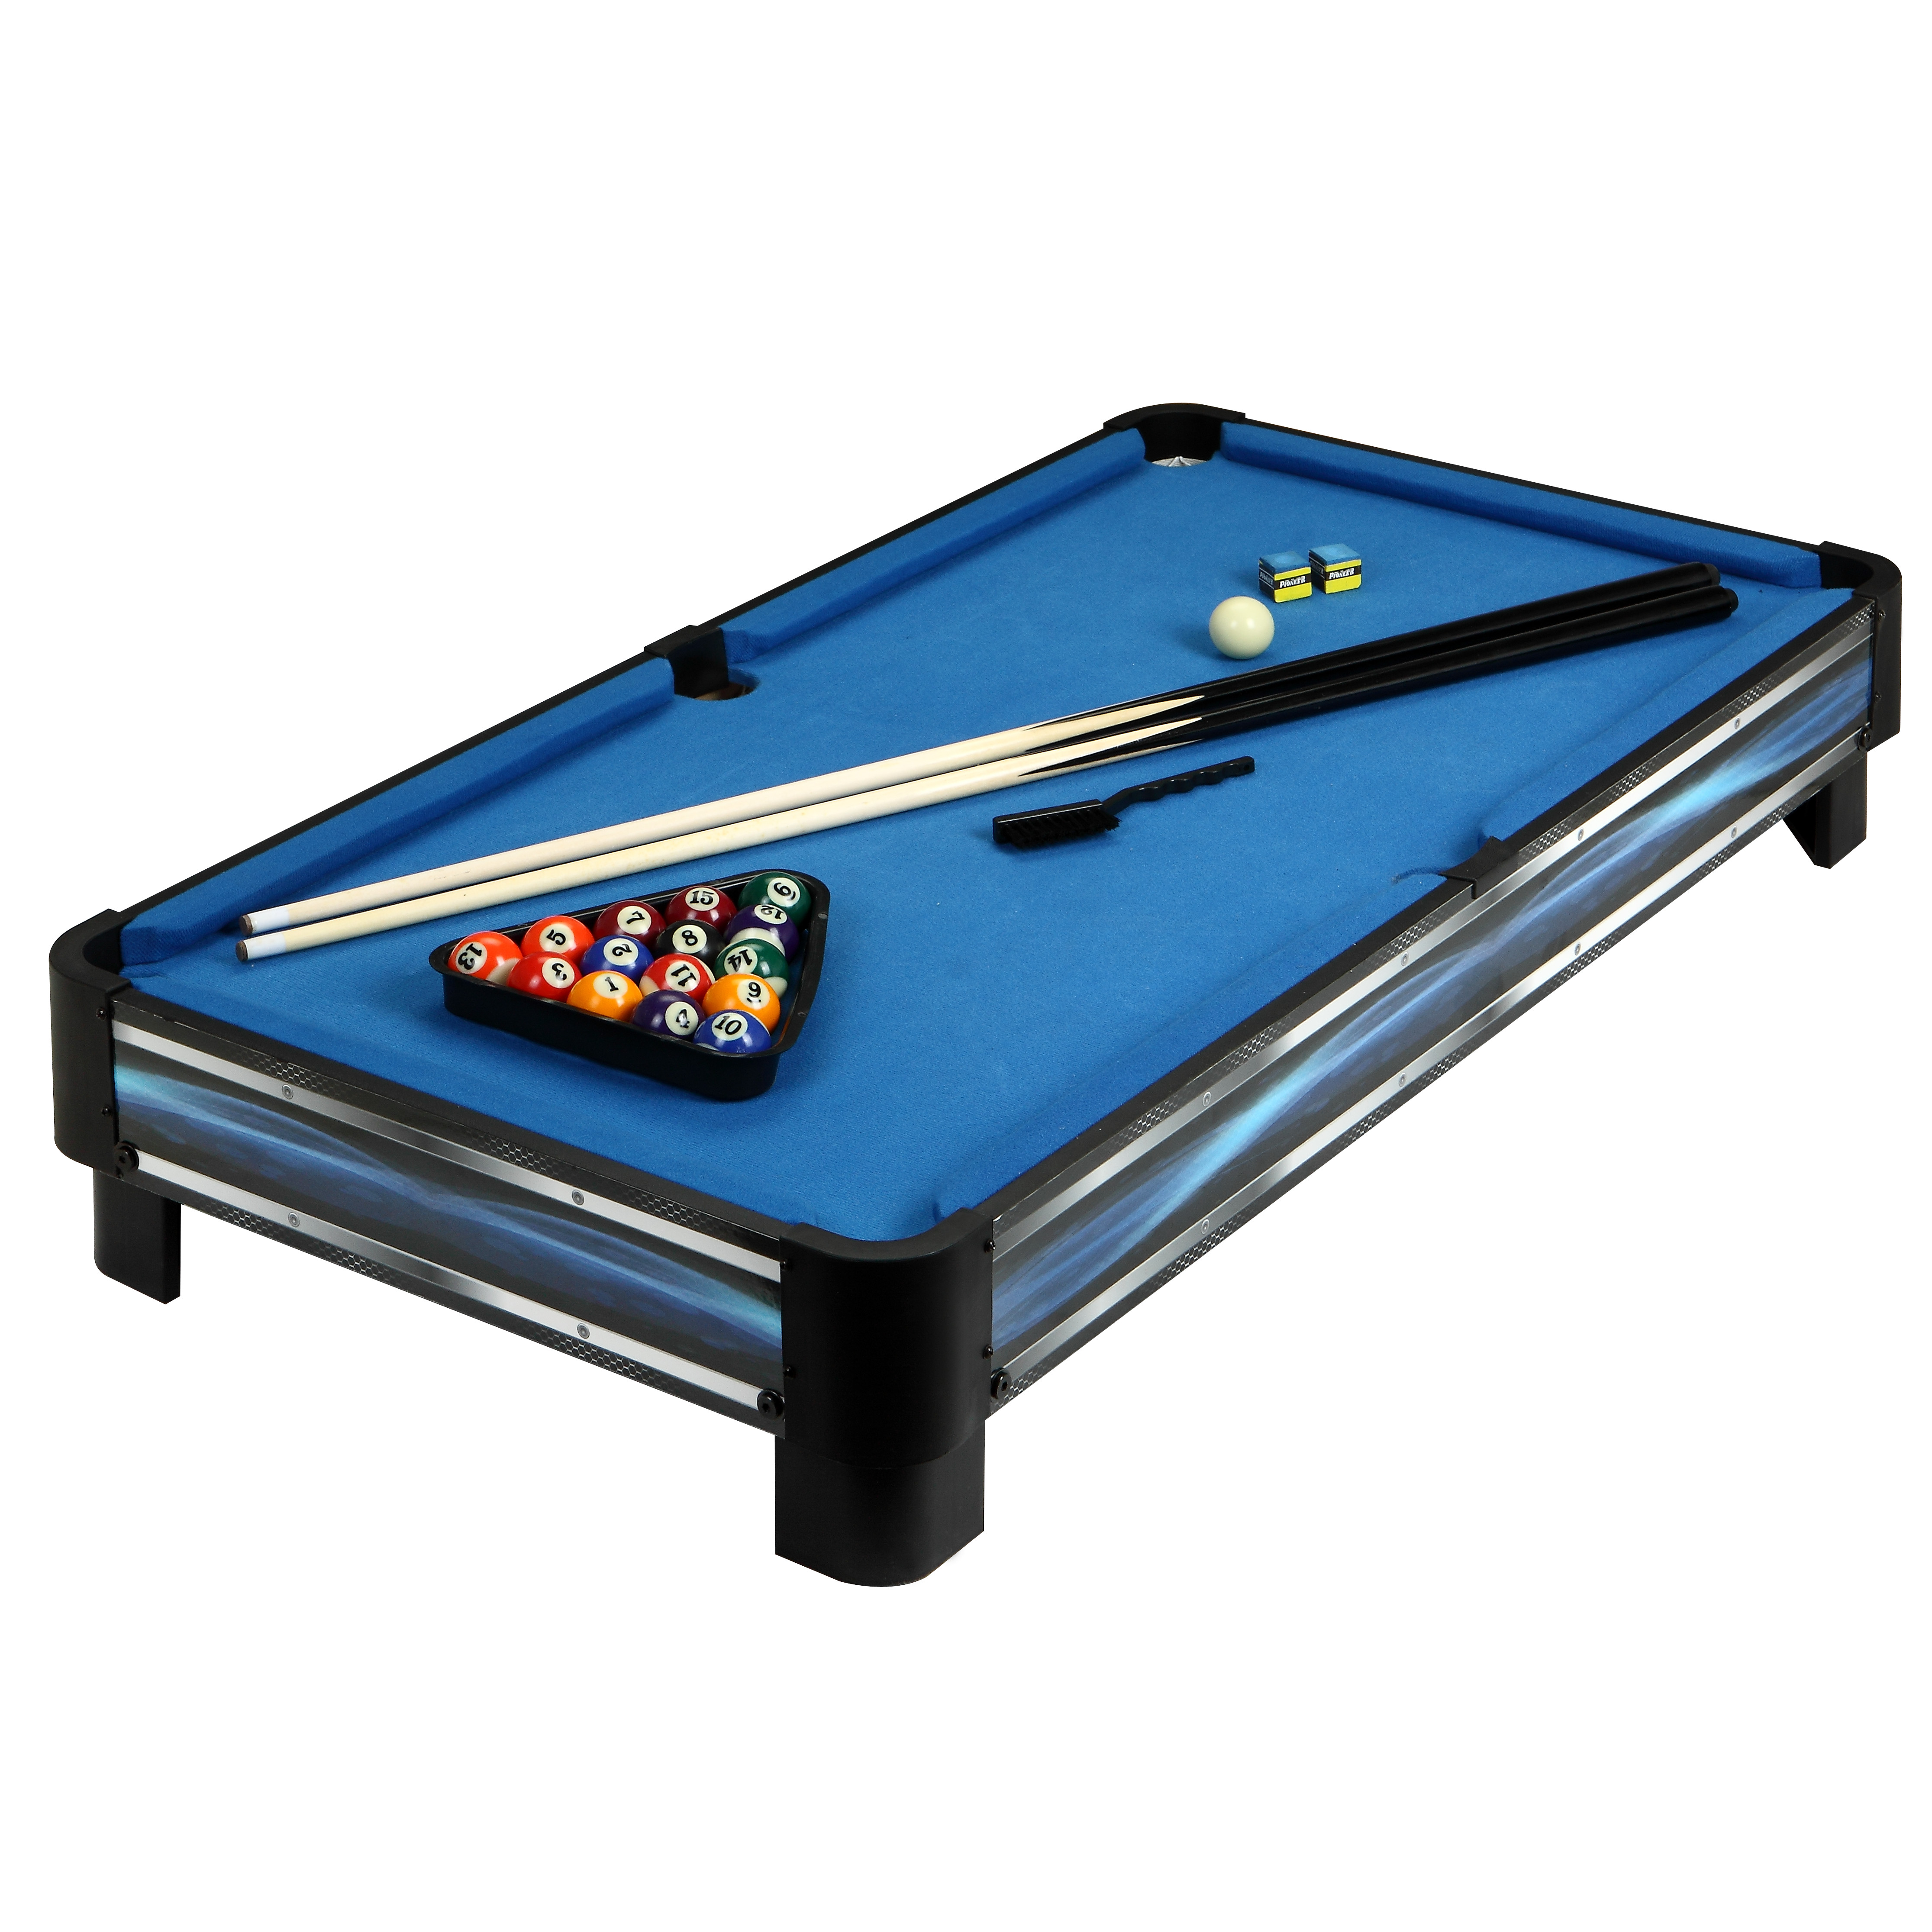 Hathaway Breakout Tabletop Pool Table, 40 In. Blue - image 1 of 7